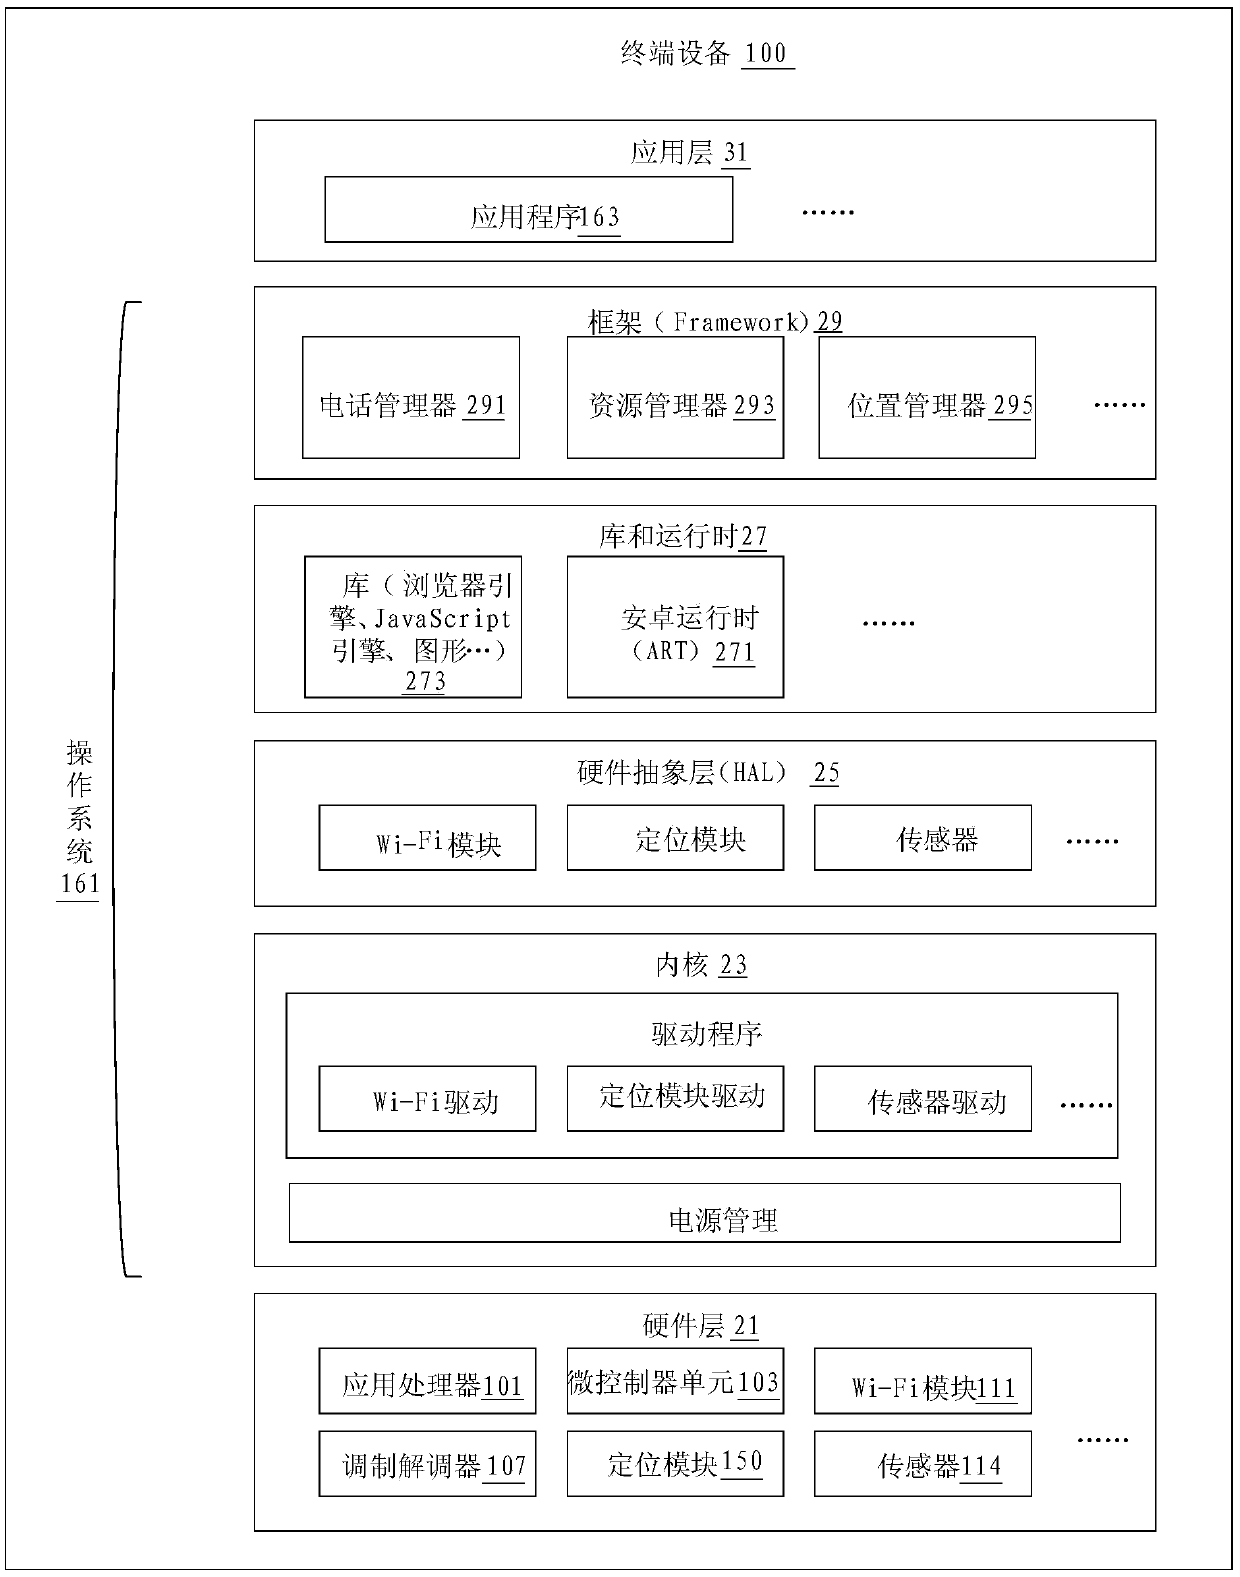 Memory management method and related equipment